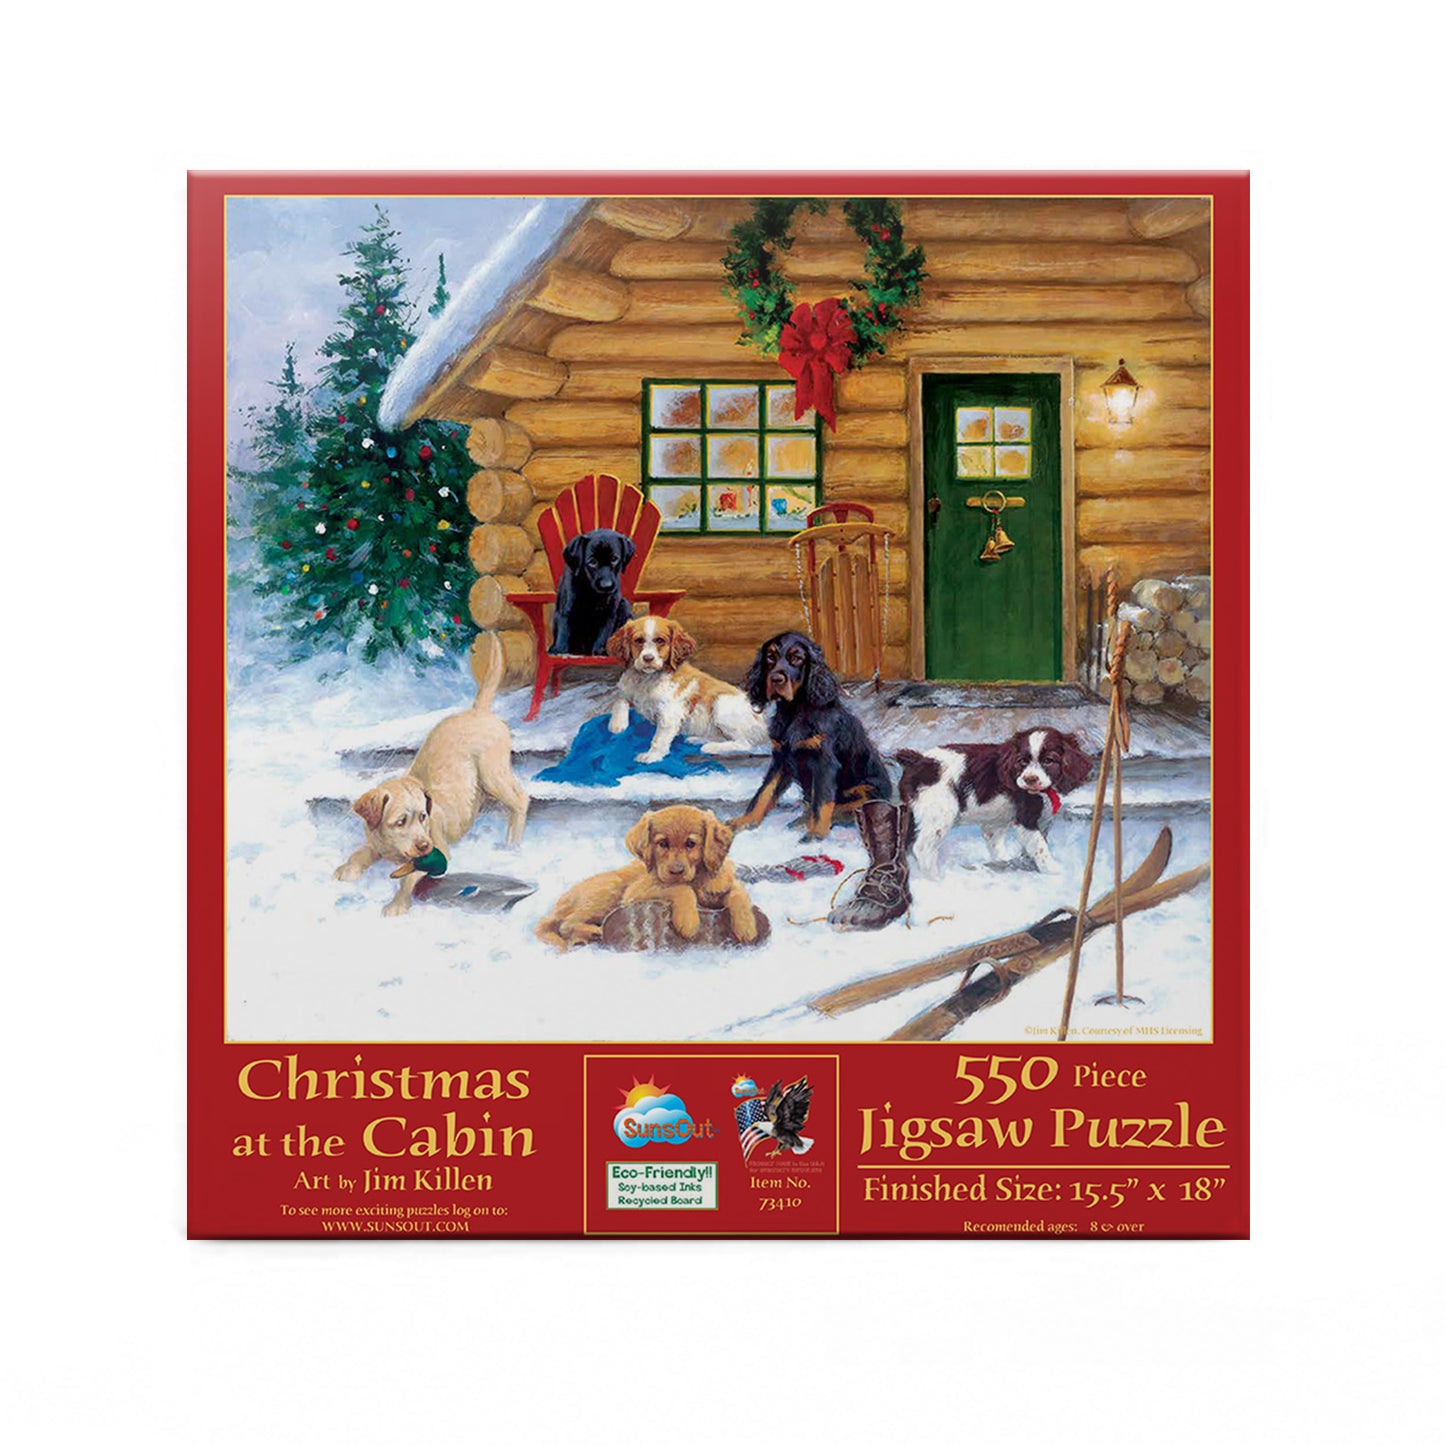 Christmas at The Cabin - 550 Piece Jigsaw Puzzle